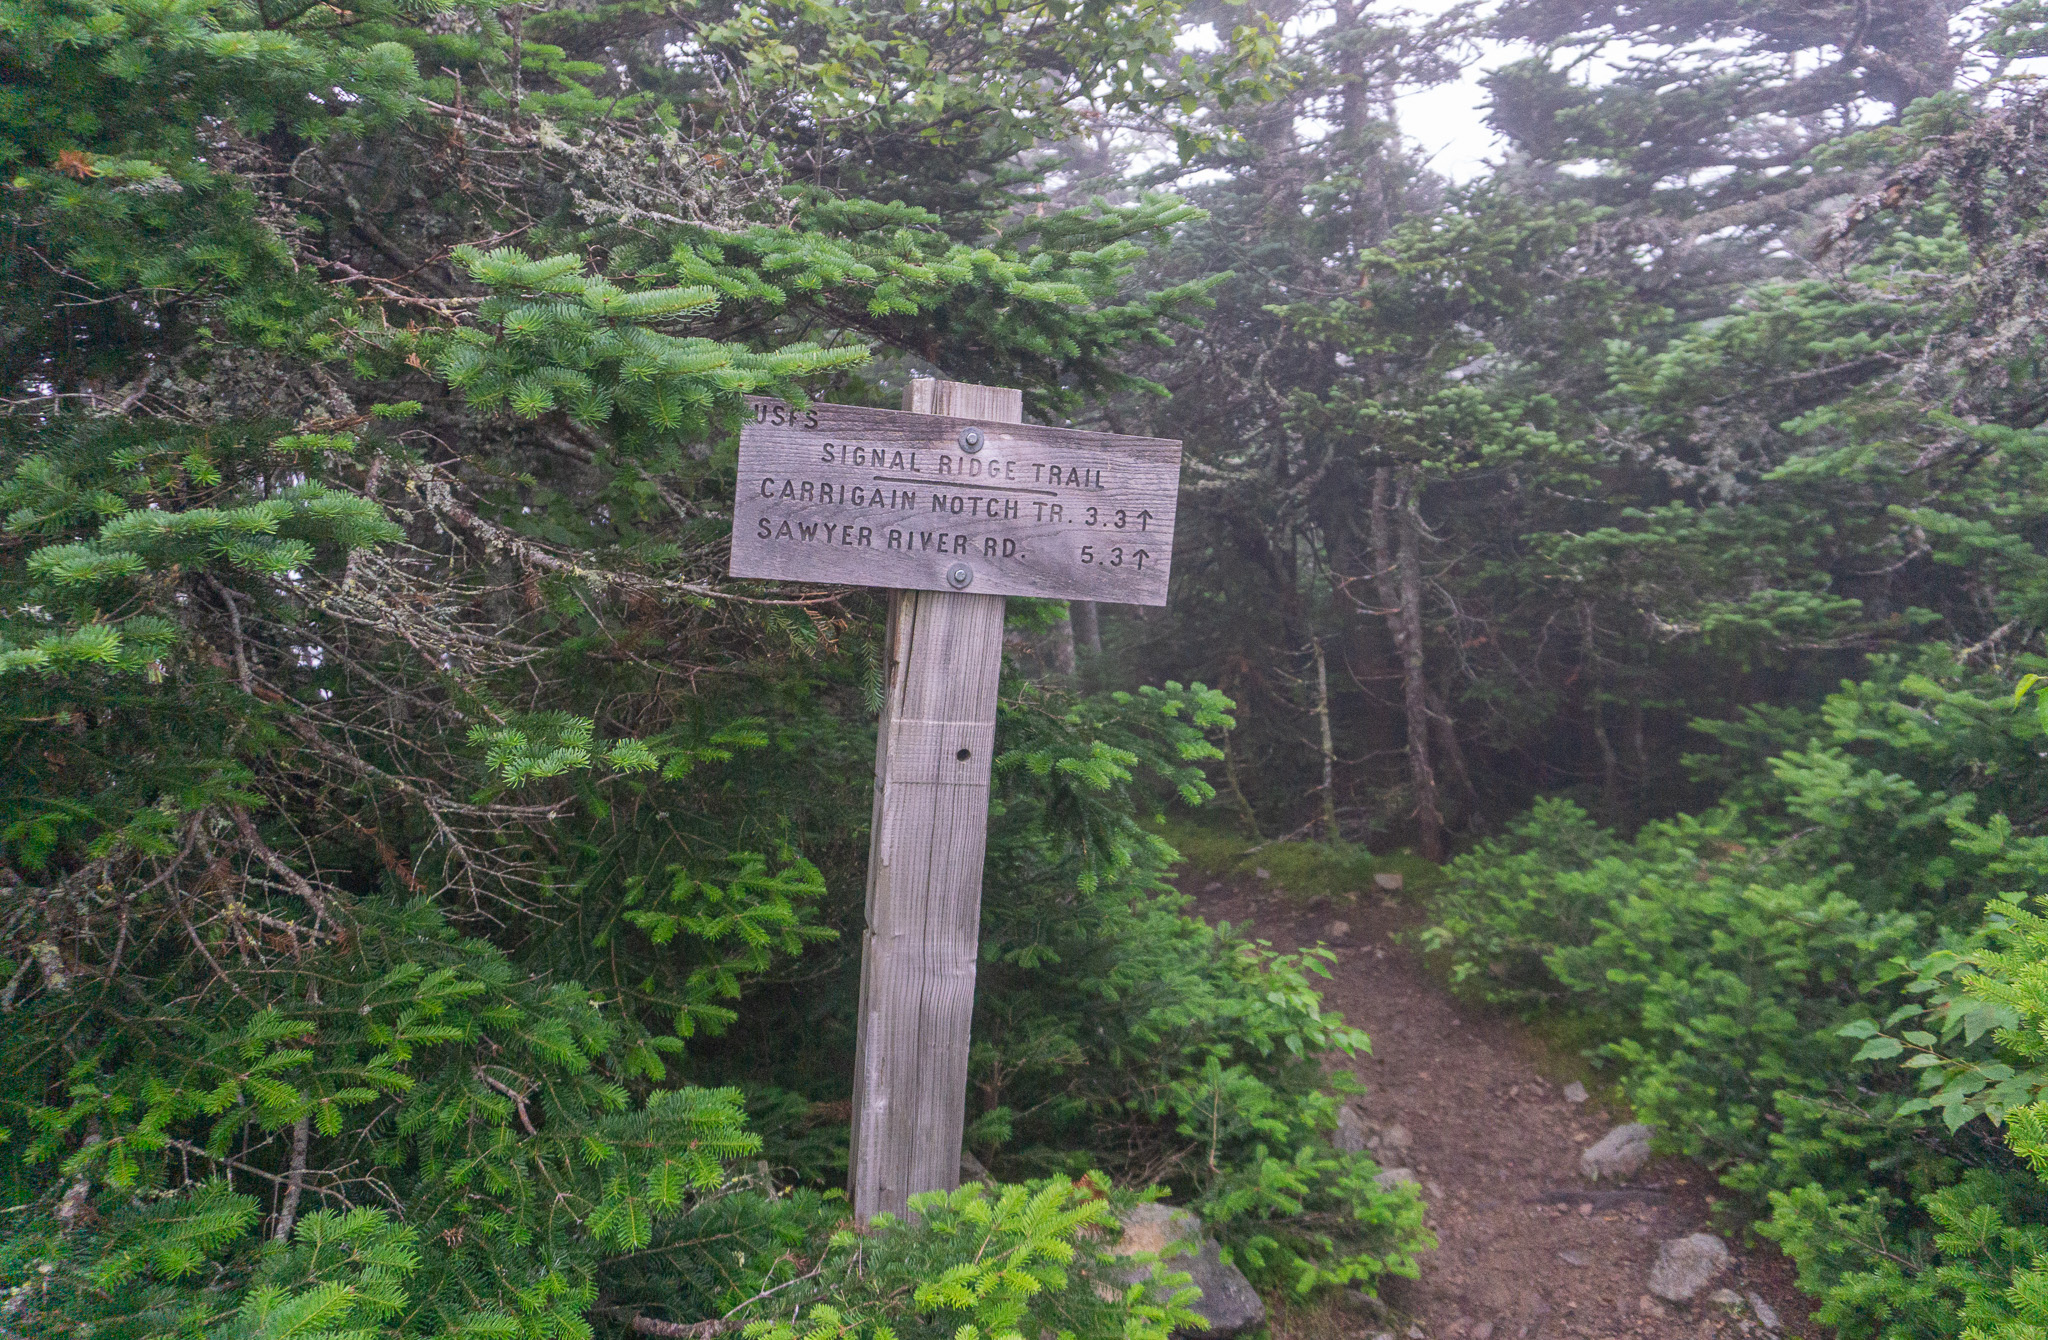 Sign for Signal Ridge on Mount Carrigain 